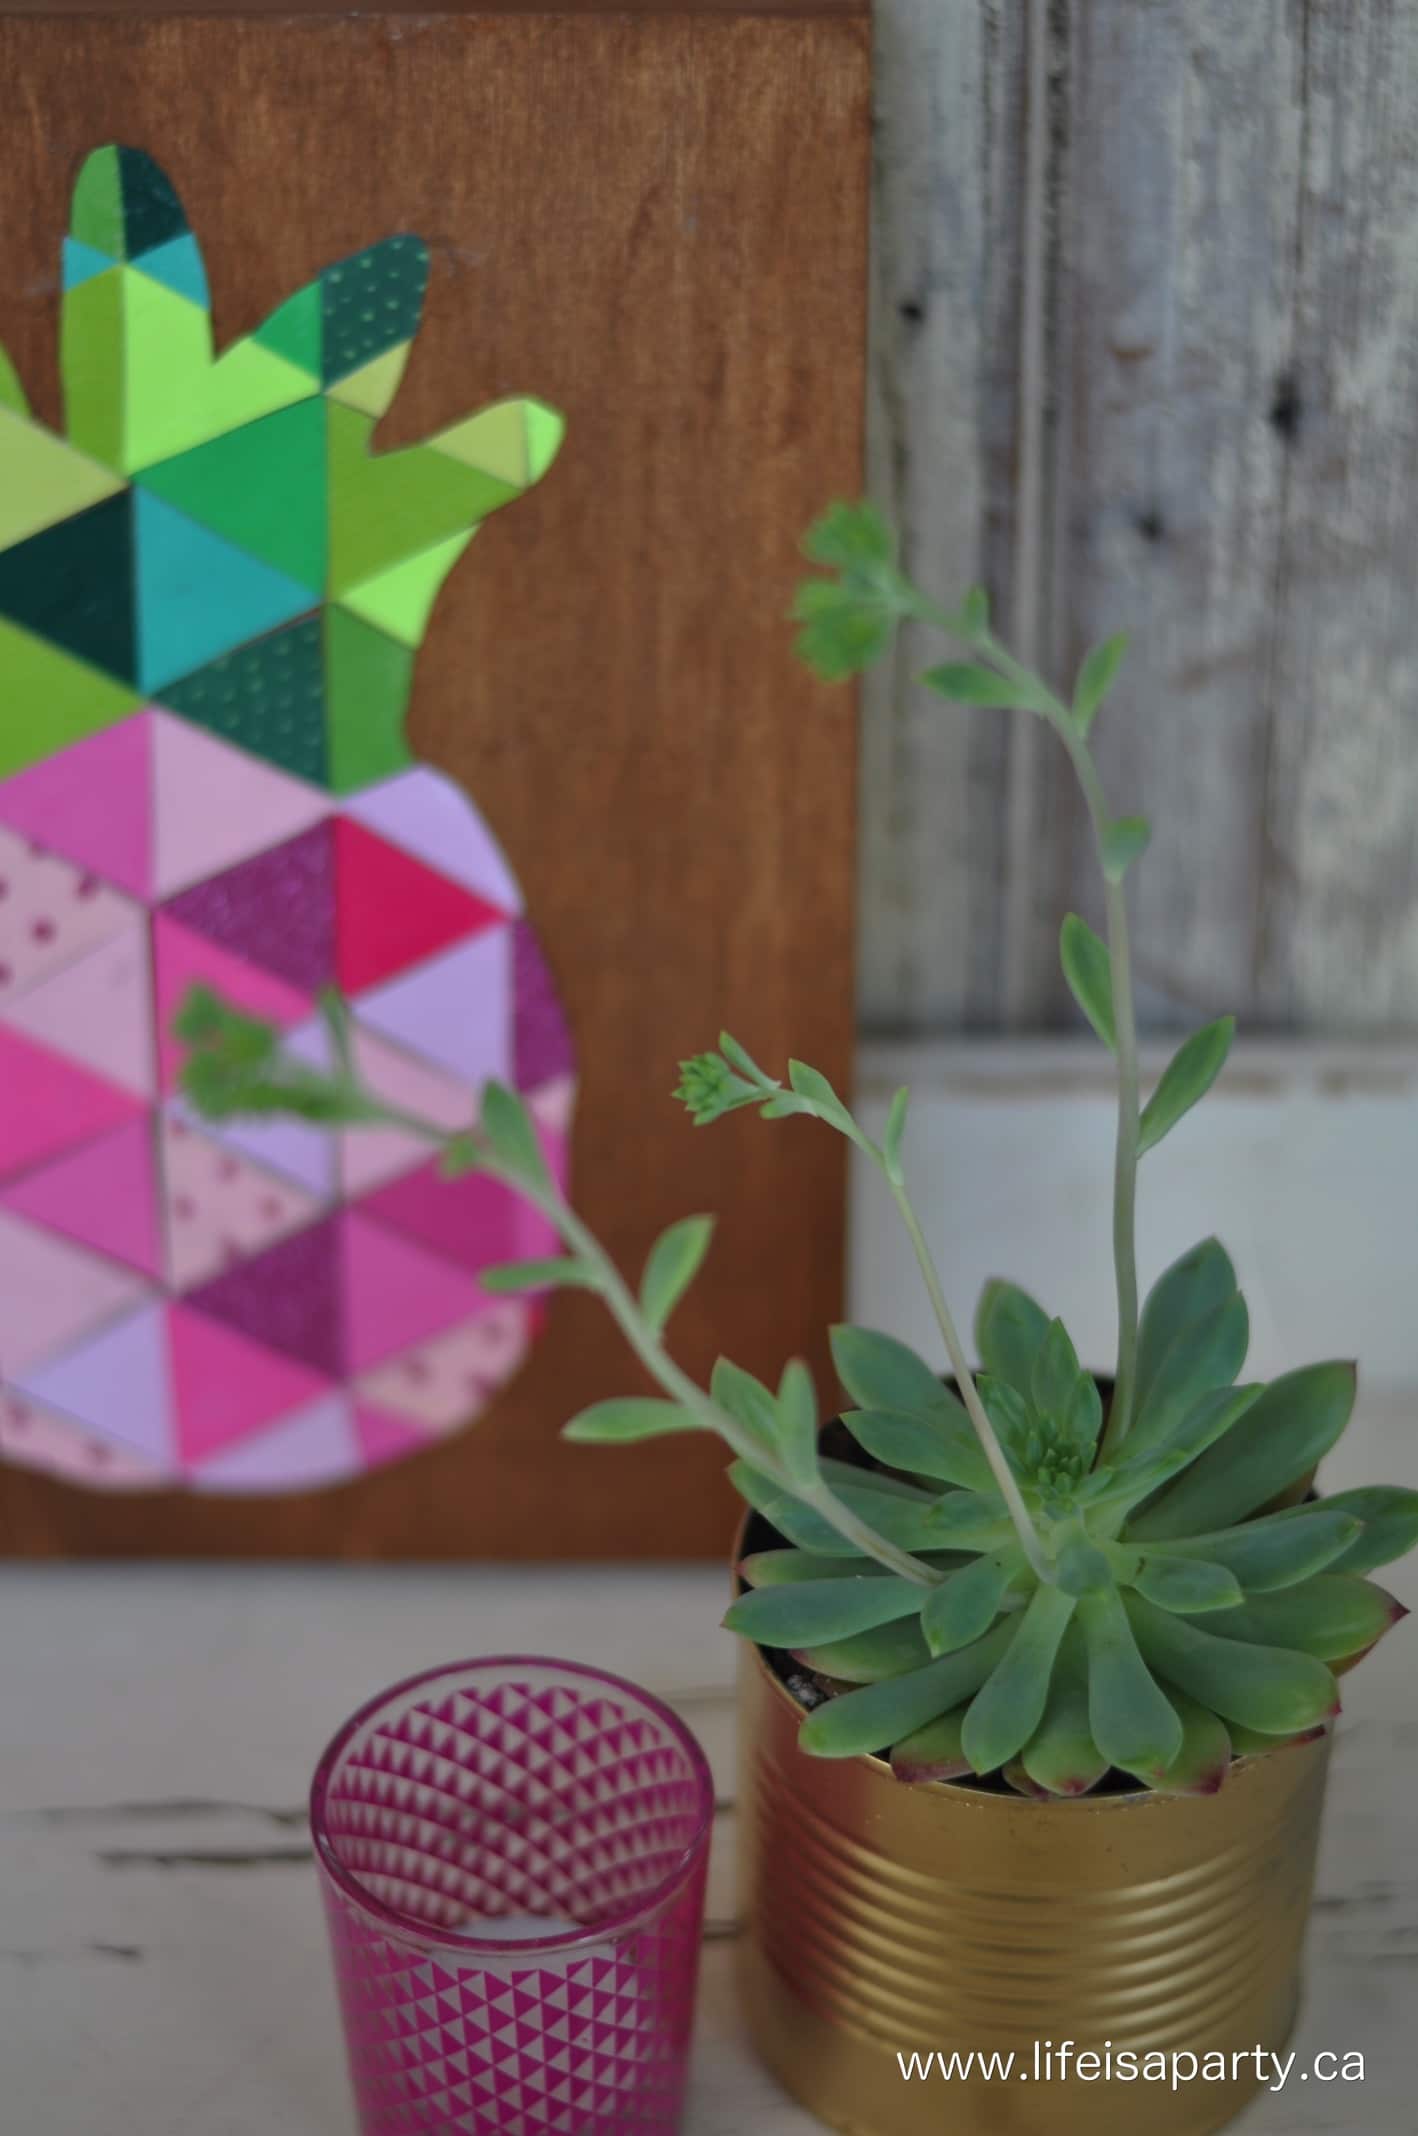 pineapple art and a succulent